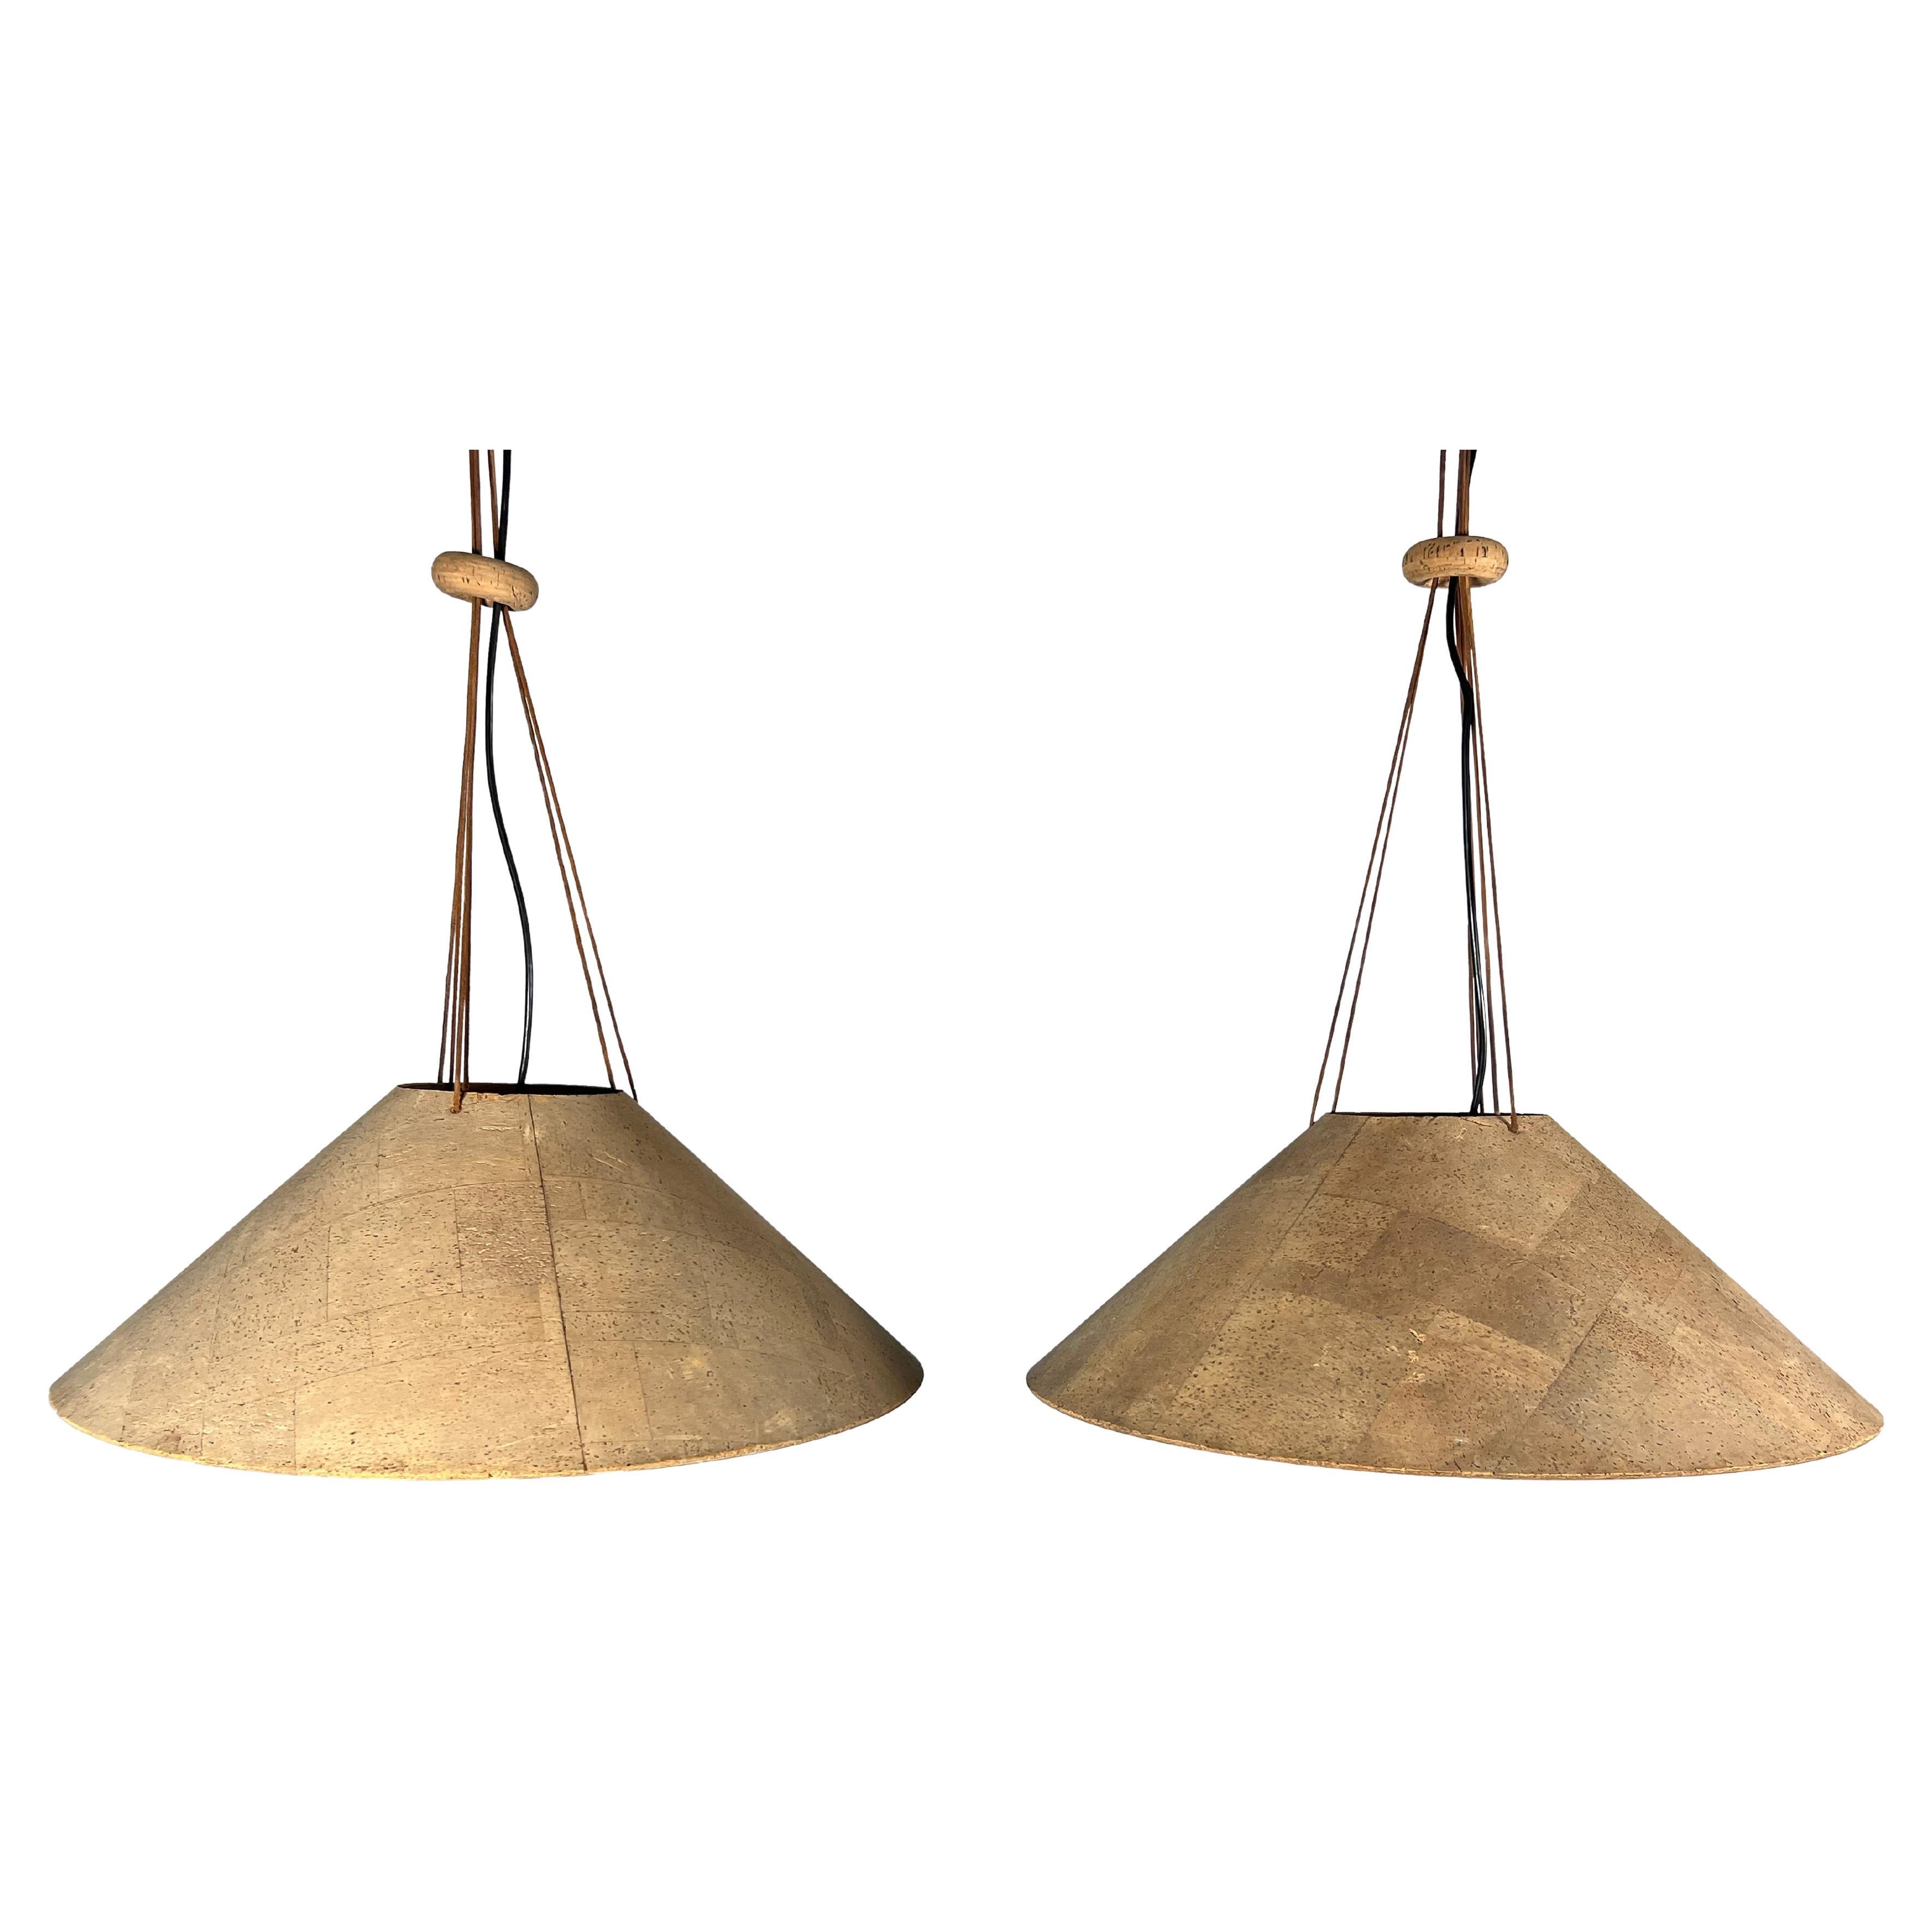 Rare Set of Two Pendant Lamps Zanotl in Cork by Wilhelm Zannoth for Ingo Maurer